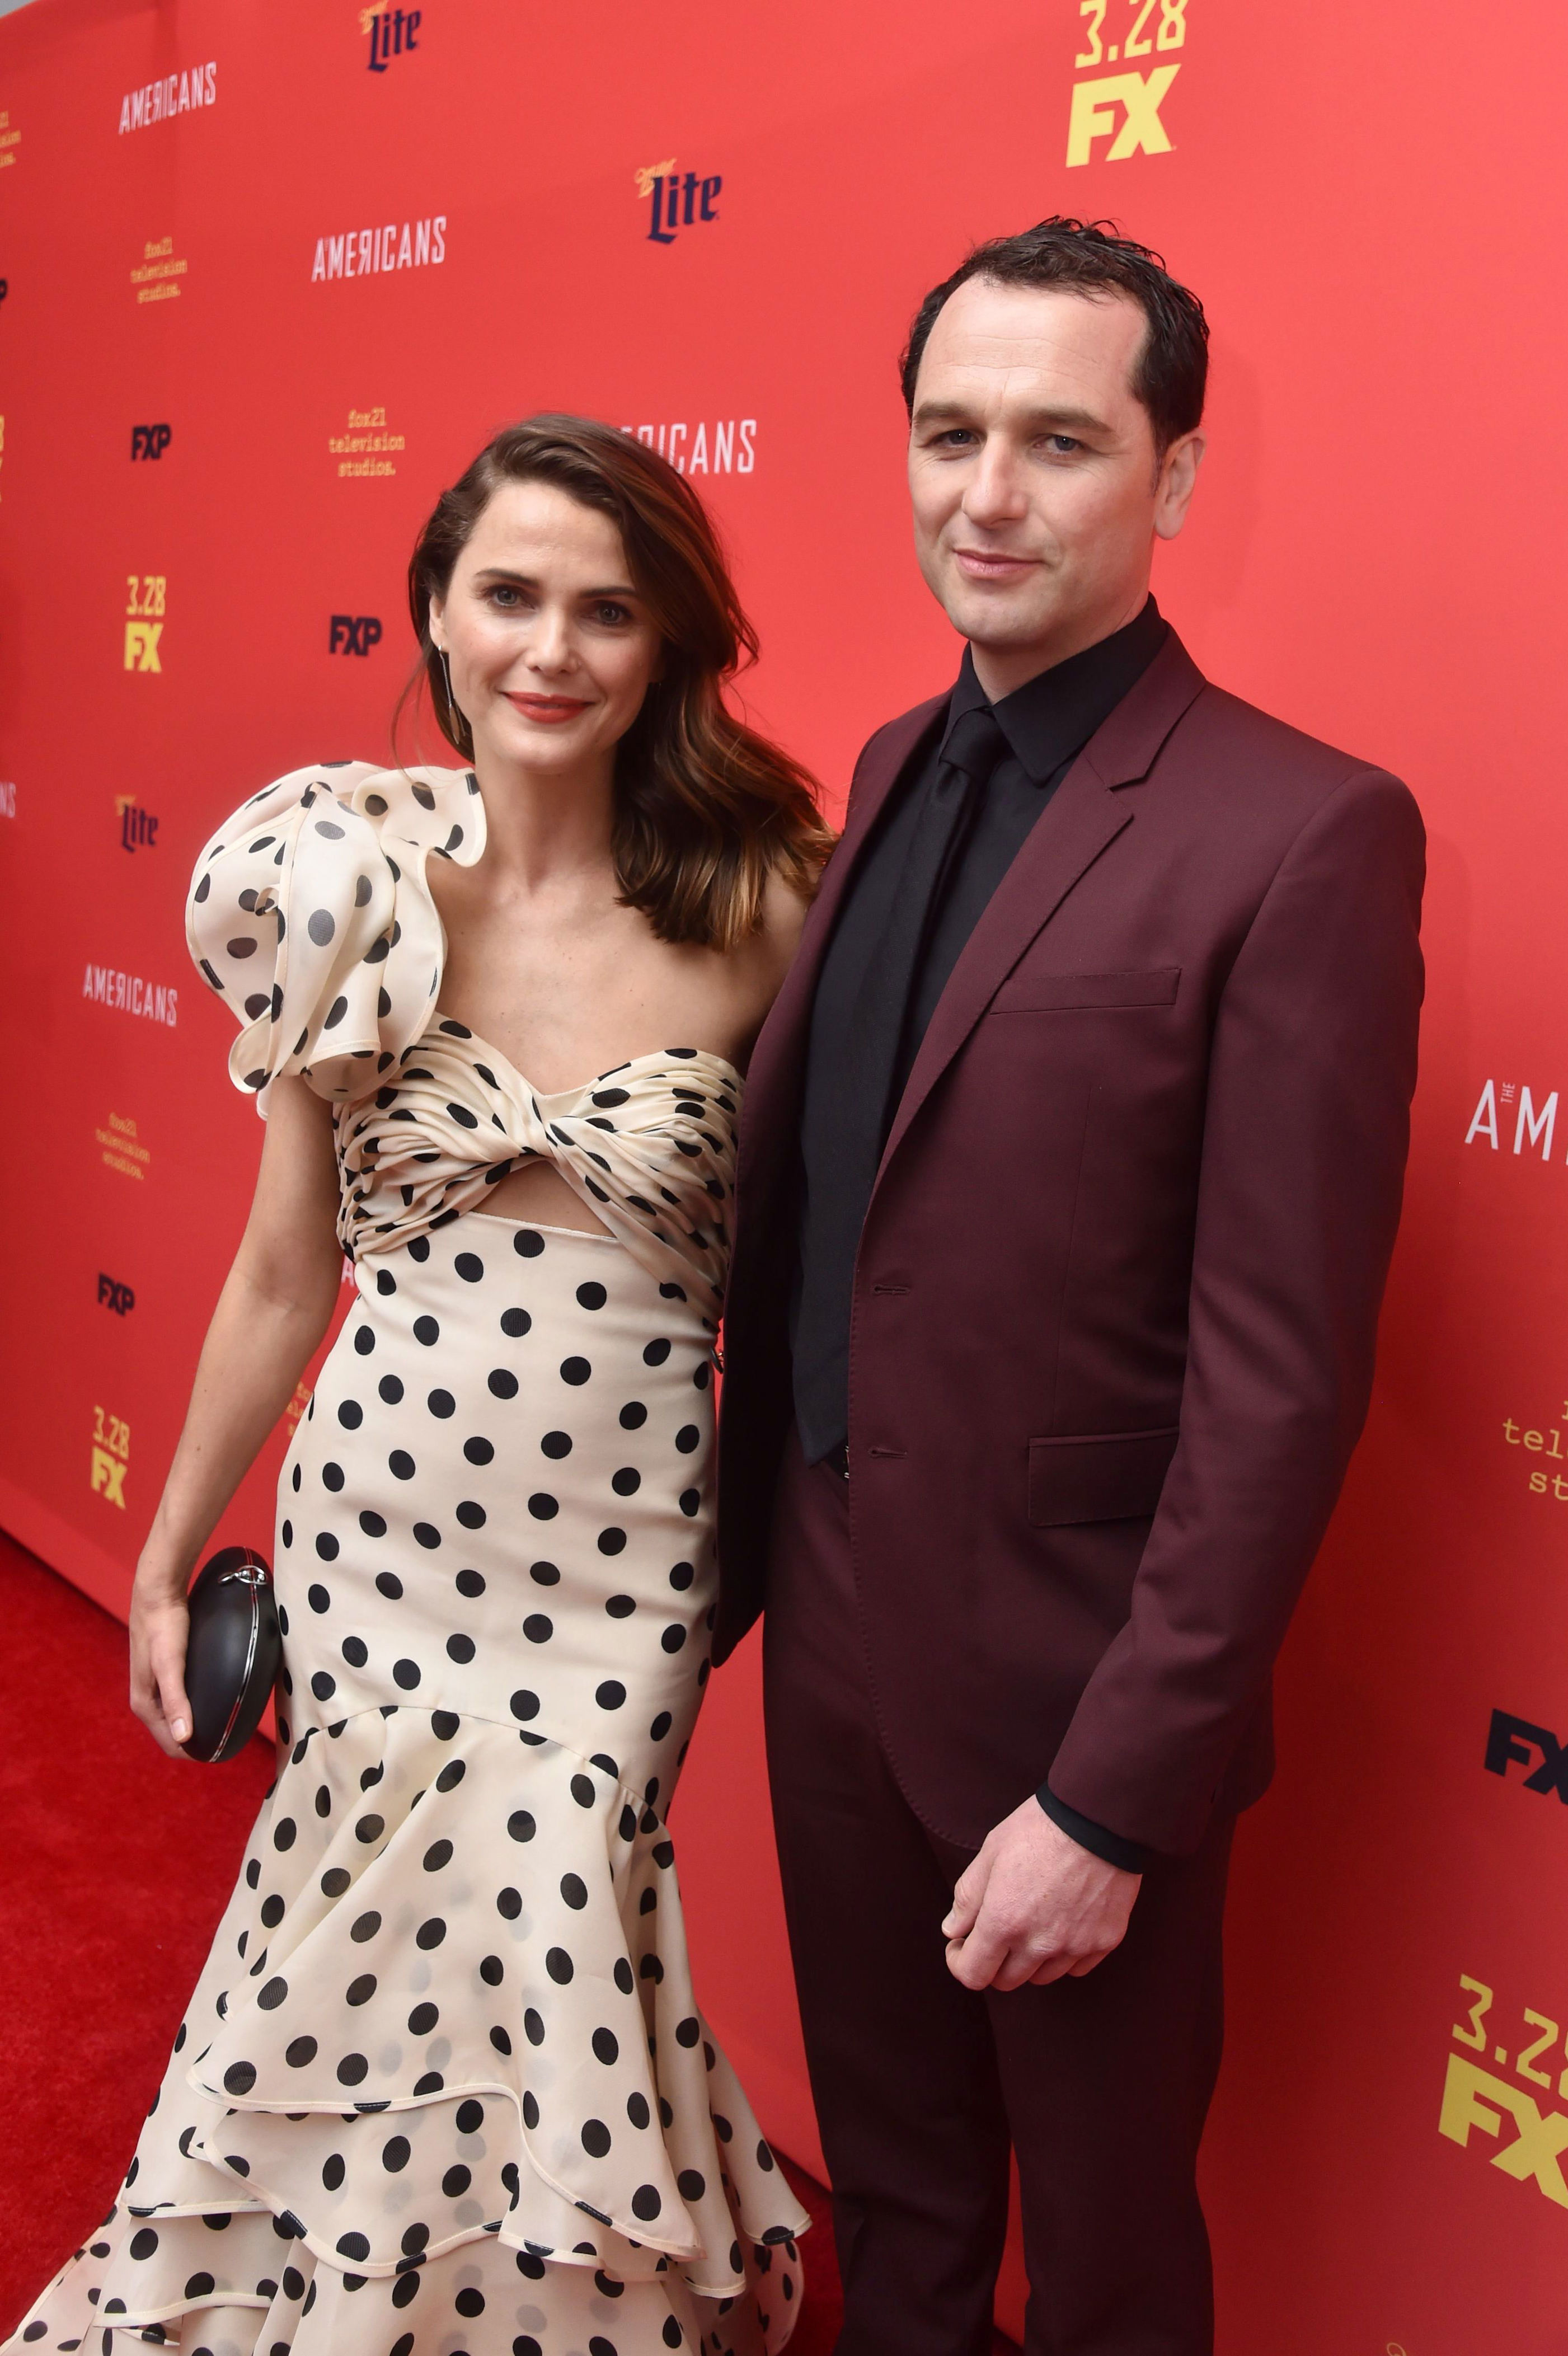 <p>On "Watch What Happens Live with <a href="https://www.wonderwall.com/celebrity/profiles/overview/andy-cohen-1524.article">Andy Cohen</a>" in 2017, Keri Russell and Matthew Rhys dished on how they first met and later fell in love on the set of "The Americans." Said the Welsh actor, "We actually met a very long, long time ago, and I very drunkenly asked her for her number when she was a young, single slip of a thing. So I sort of knew then when I was 26 [circa 2000]. ... It was in a parking lot [after a kickball party]. Very romantic. And she asked me to open a beer." Matthew added that his attraction to Keri was rekindled when they started working together: "It took a while," he said as she laughed. Keri chimed in, "Basically we did all the readings together and all the things and then after a heavy dose of a fight training, all sweaty at a lunch, he said, 'You know we've met before,' and I said, 'No, we haven't.' And he said, 'Yeah, we met before, like 10 years ago.'" Said Matthew to Keri, "I left you a drunken message, and you were like, 'Oh, I'm shocked that I didn't call you back.'" Recalled the actress, "As soon as he said that, I knew exactly what he was [talking about], and I said, 'Of course, I remember that.'" Joked the actor, "'You were that buffoon that wouldn't stop calling!'" After ending her marriage to carpenter Shane Deary, Keri and Matthew got together in 2013 and welcomed son Sam in 2016.</p>